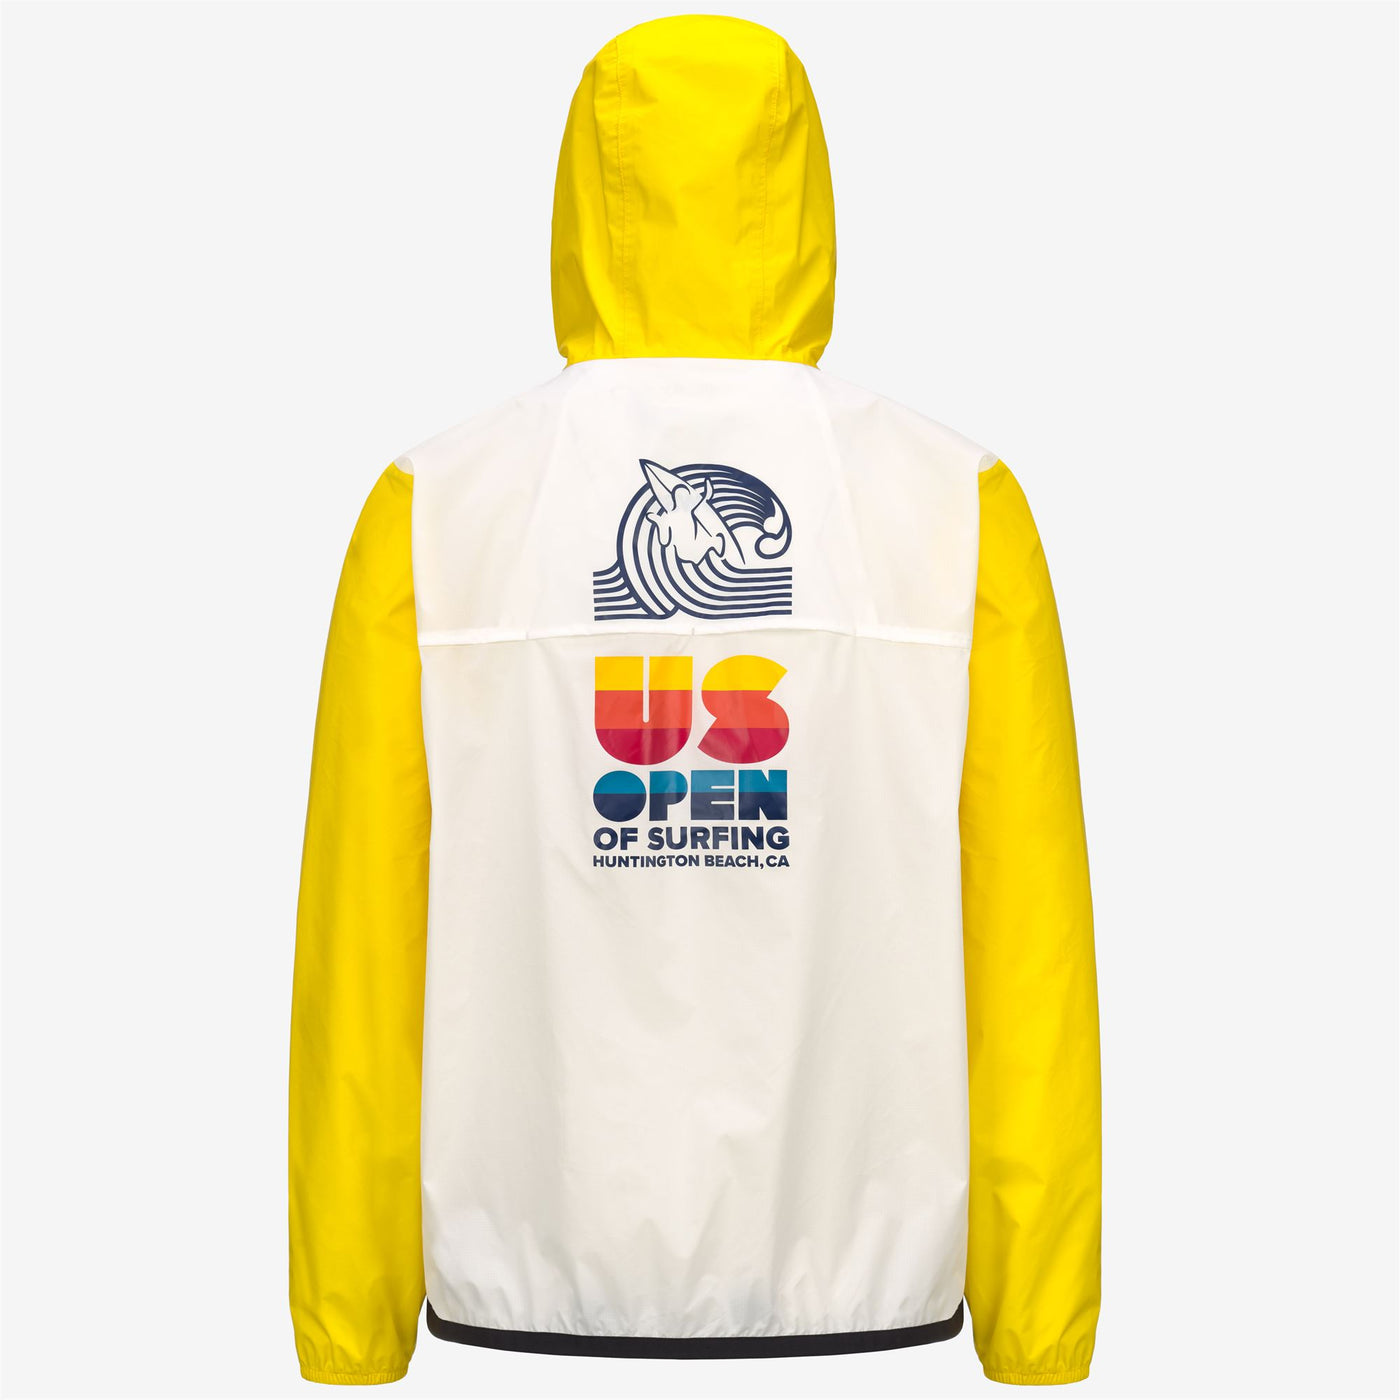 Jackets Unisex LE VRAI 3.0 CLAUDE CDG OPEN US OF SURFING BICOLOR Mid WHITE - YELLOW DK Dressed Front (jpg Rgb)	